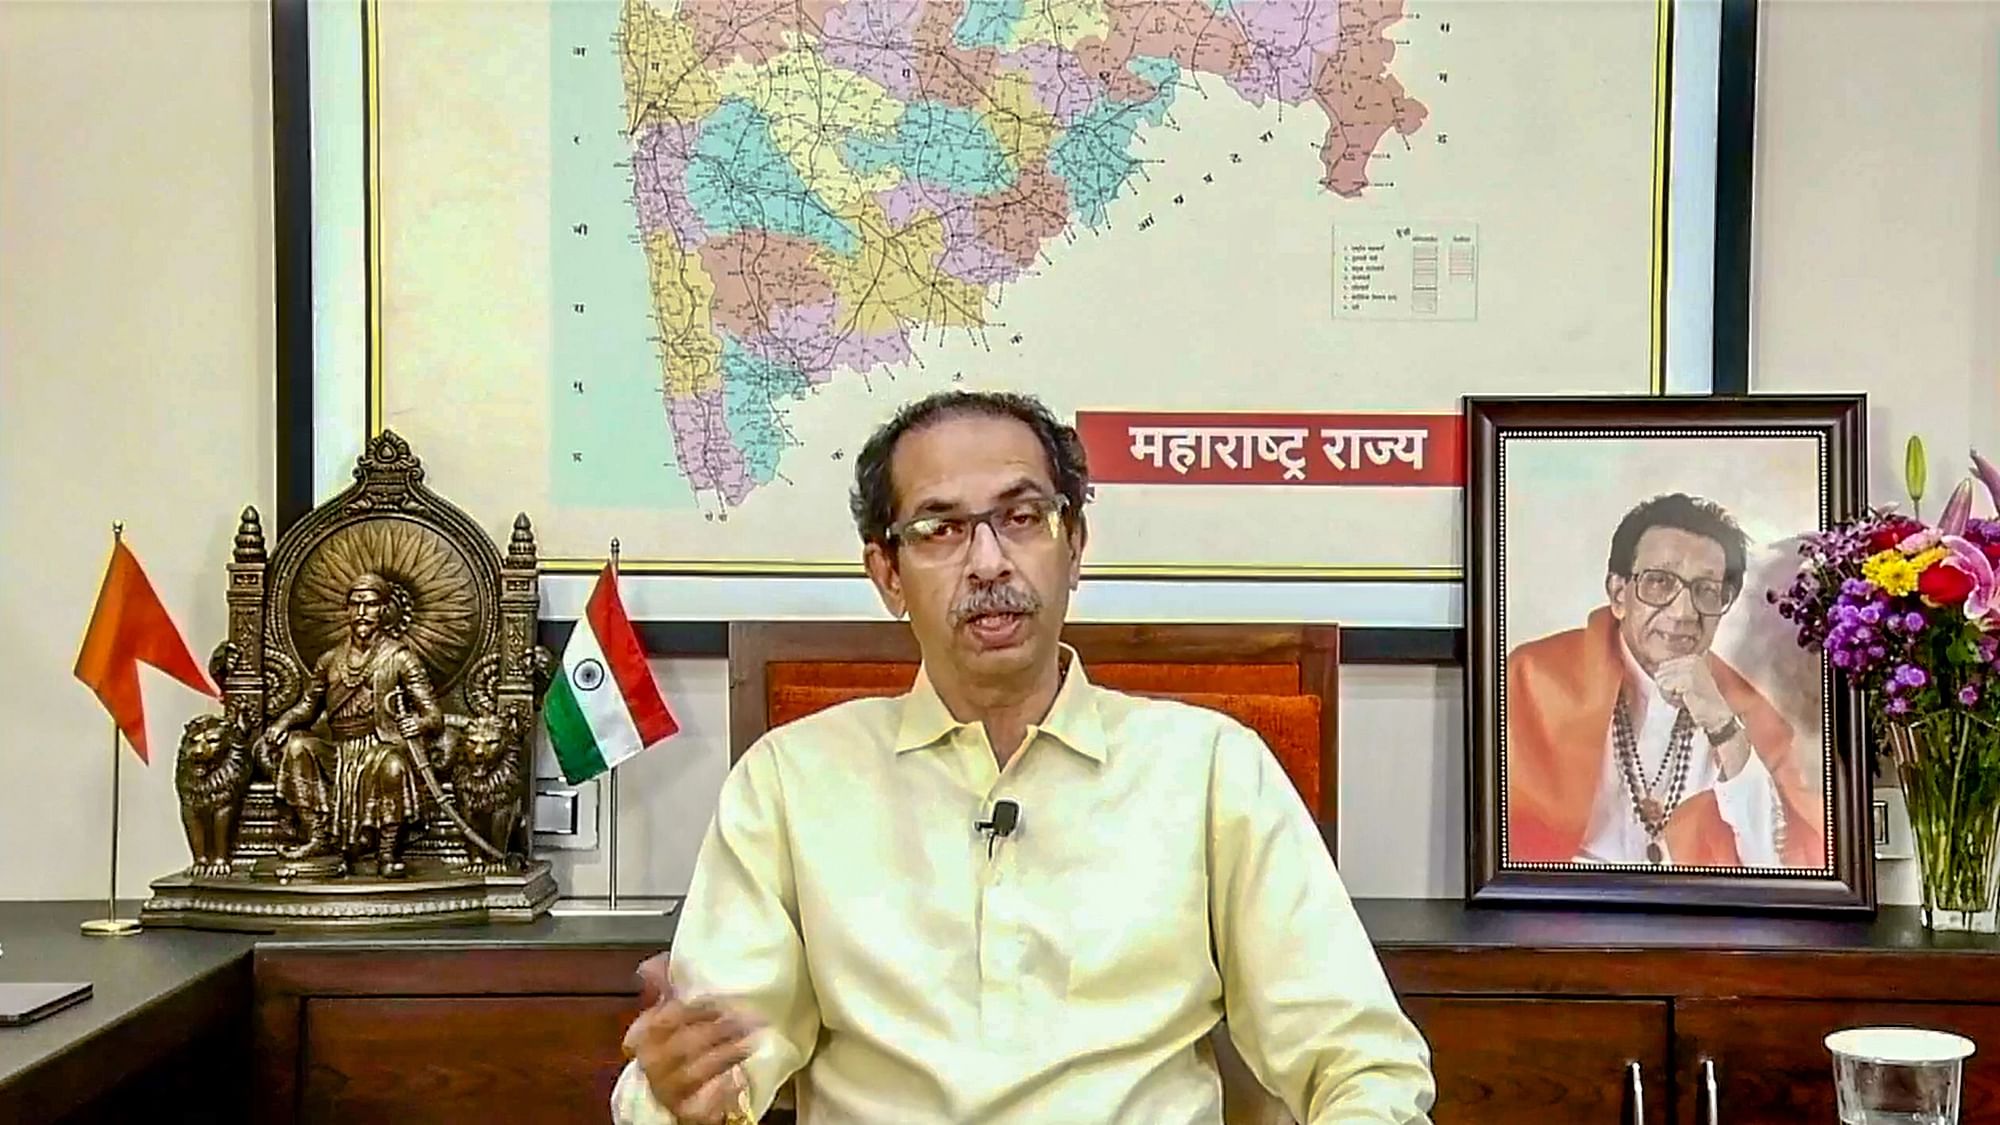 <div class="paragraphs"><p>Amid a rebellion within his party, Maharashtra Chief Minister Uddhav Thackeray, in an address delivered late on the night of Friday, 24 June said that he "will create a new Shiv Sena" if MLAs leave.</p></div>